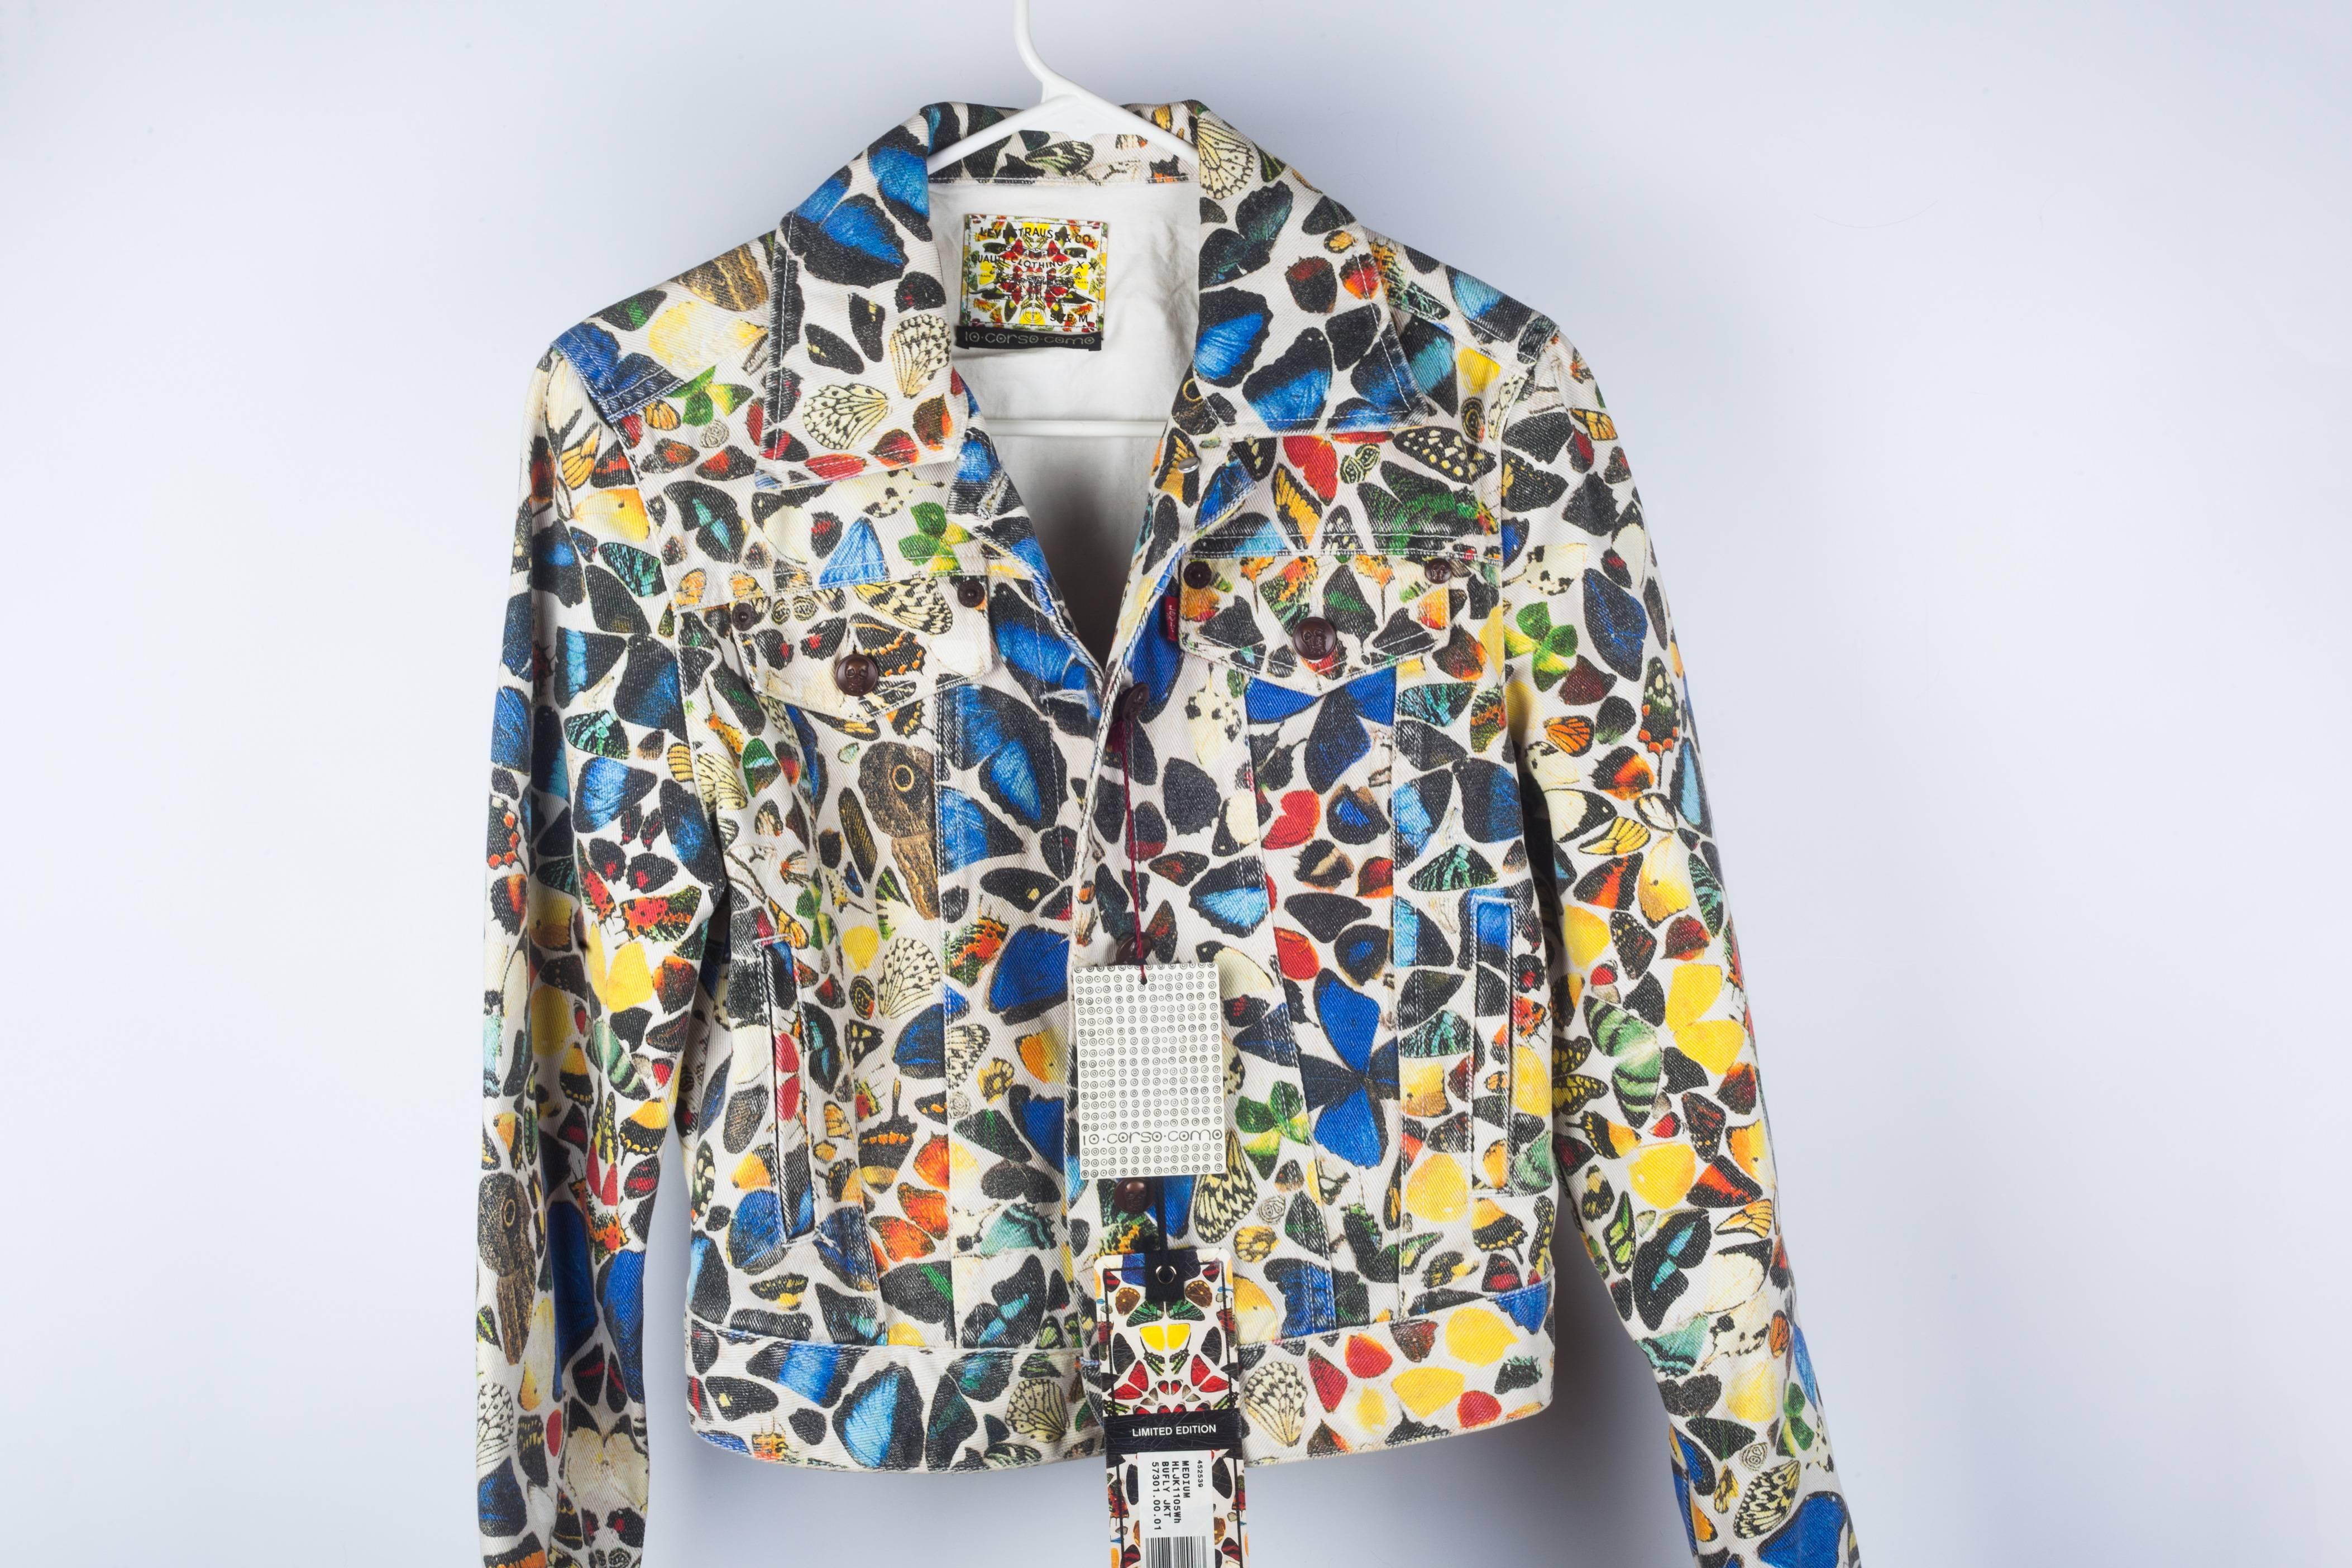 Damien Hirst’s famous Butterflies on a Levi’s Denim jacket, with his signature skull in volume on every button. After the Warhol estates, Hirst collaborated with Levi’s on a very limited edition collection in 2008 that sold out immediately. This